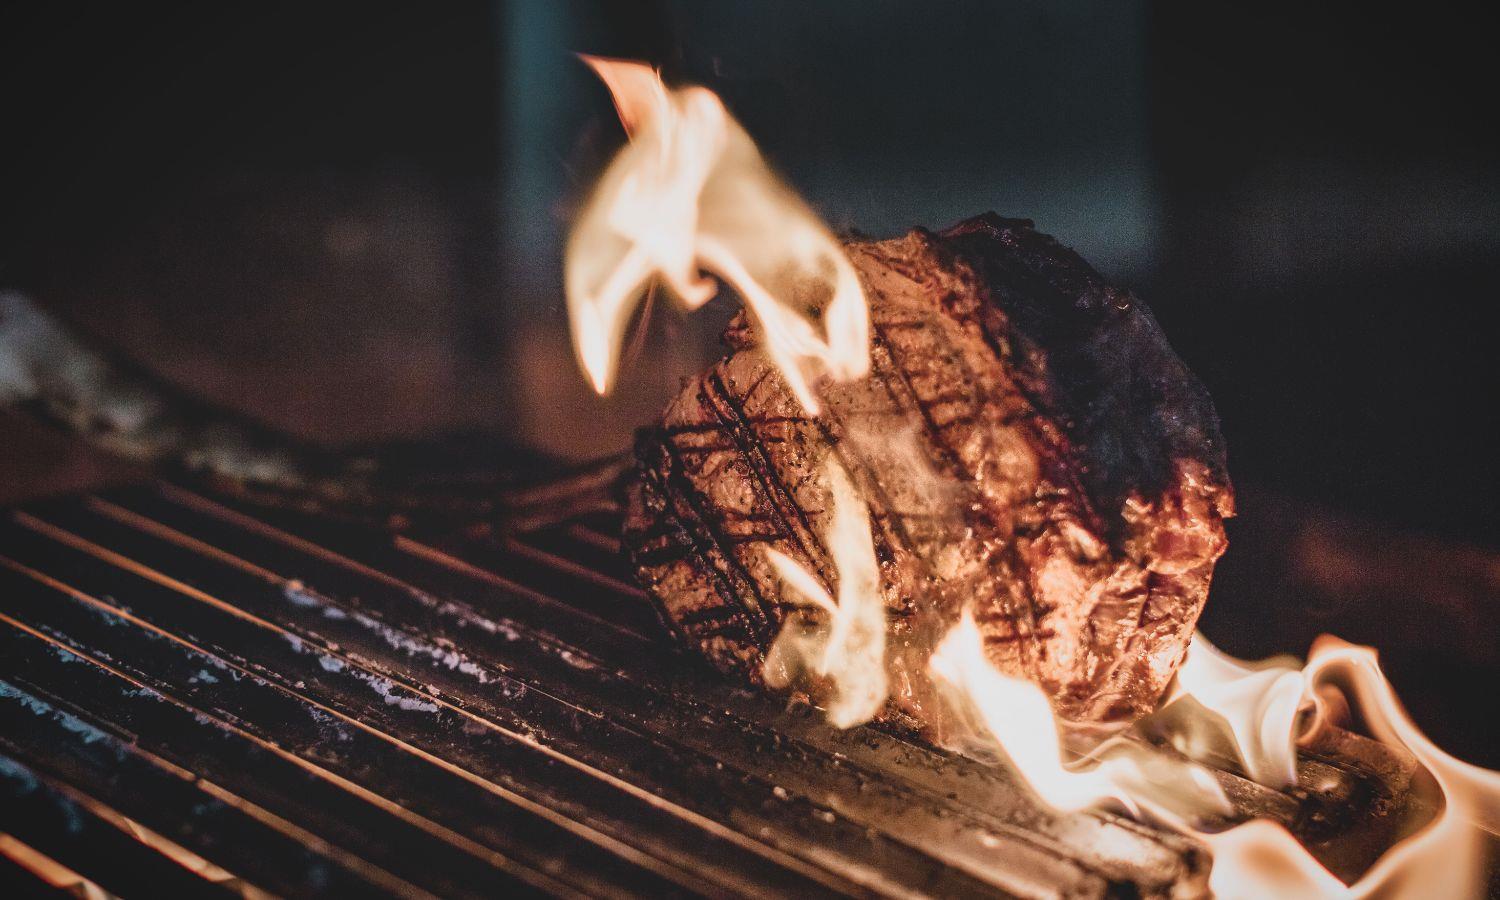 Steak being flame grilled on barbecue